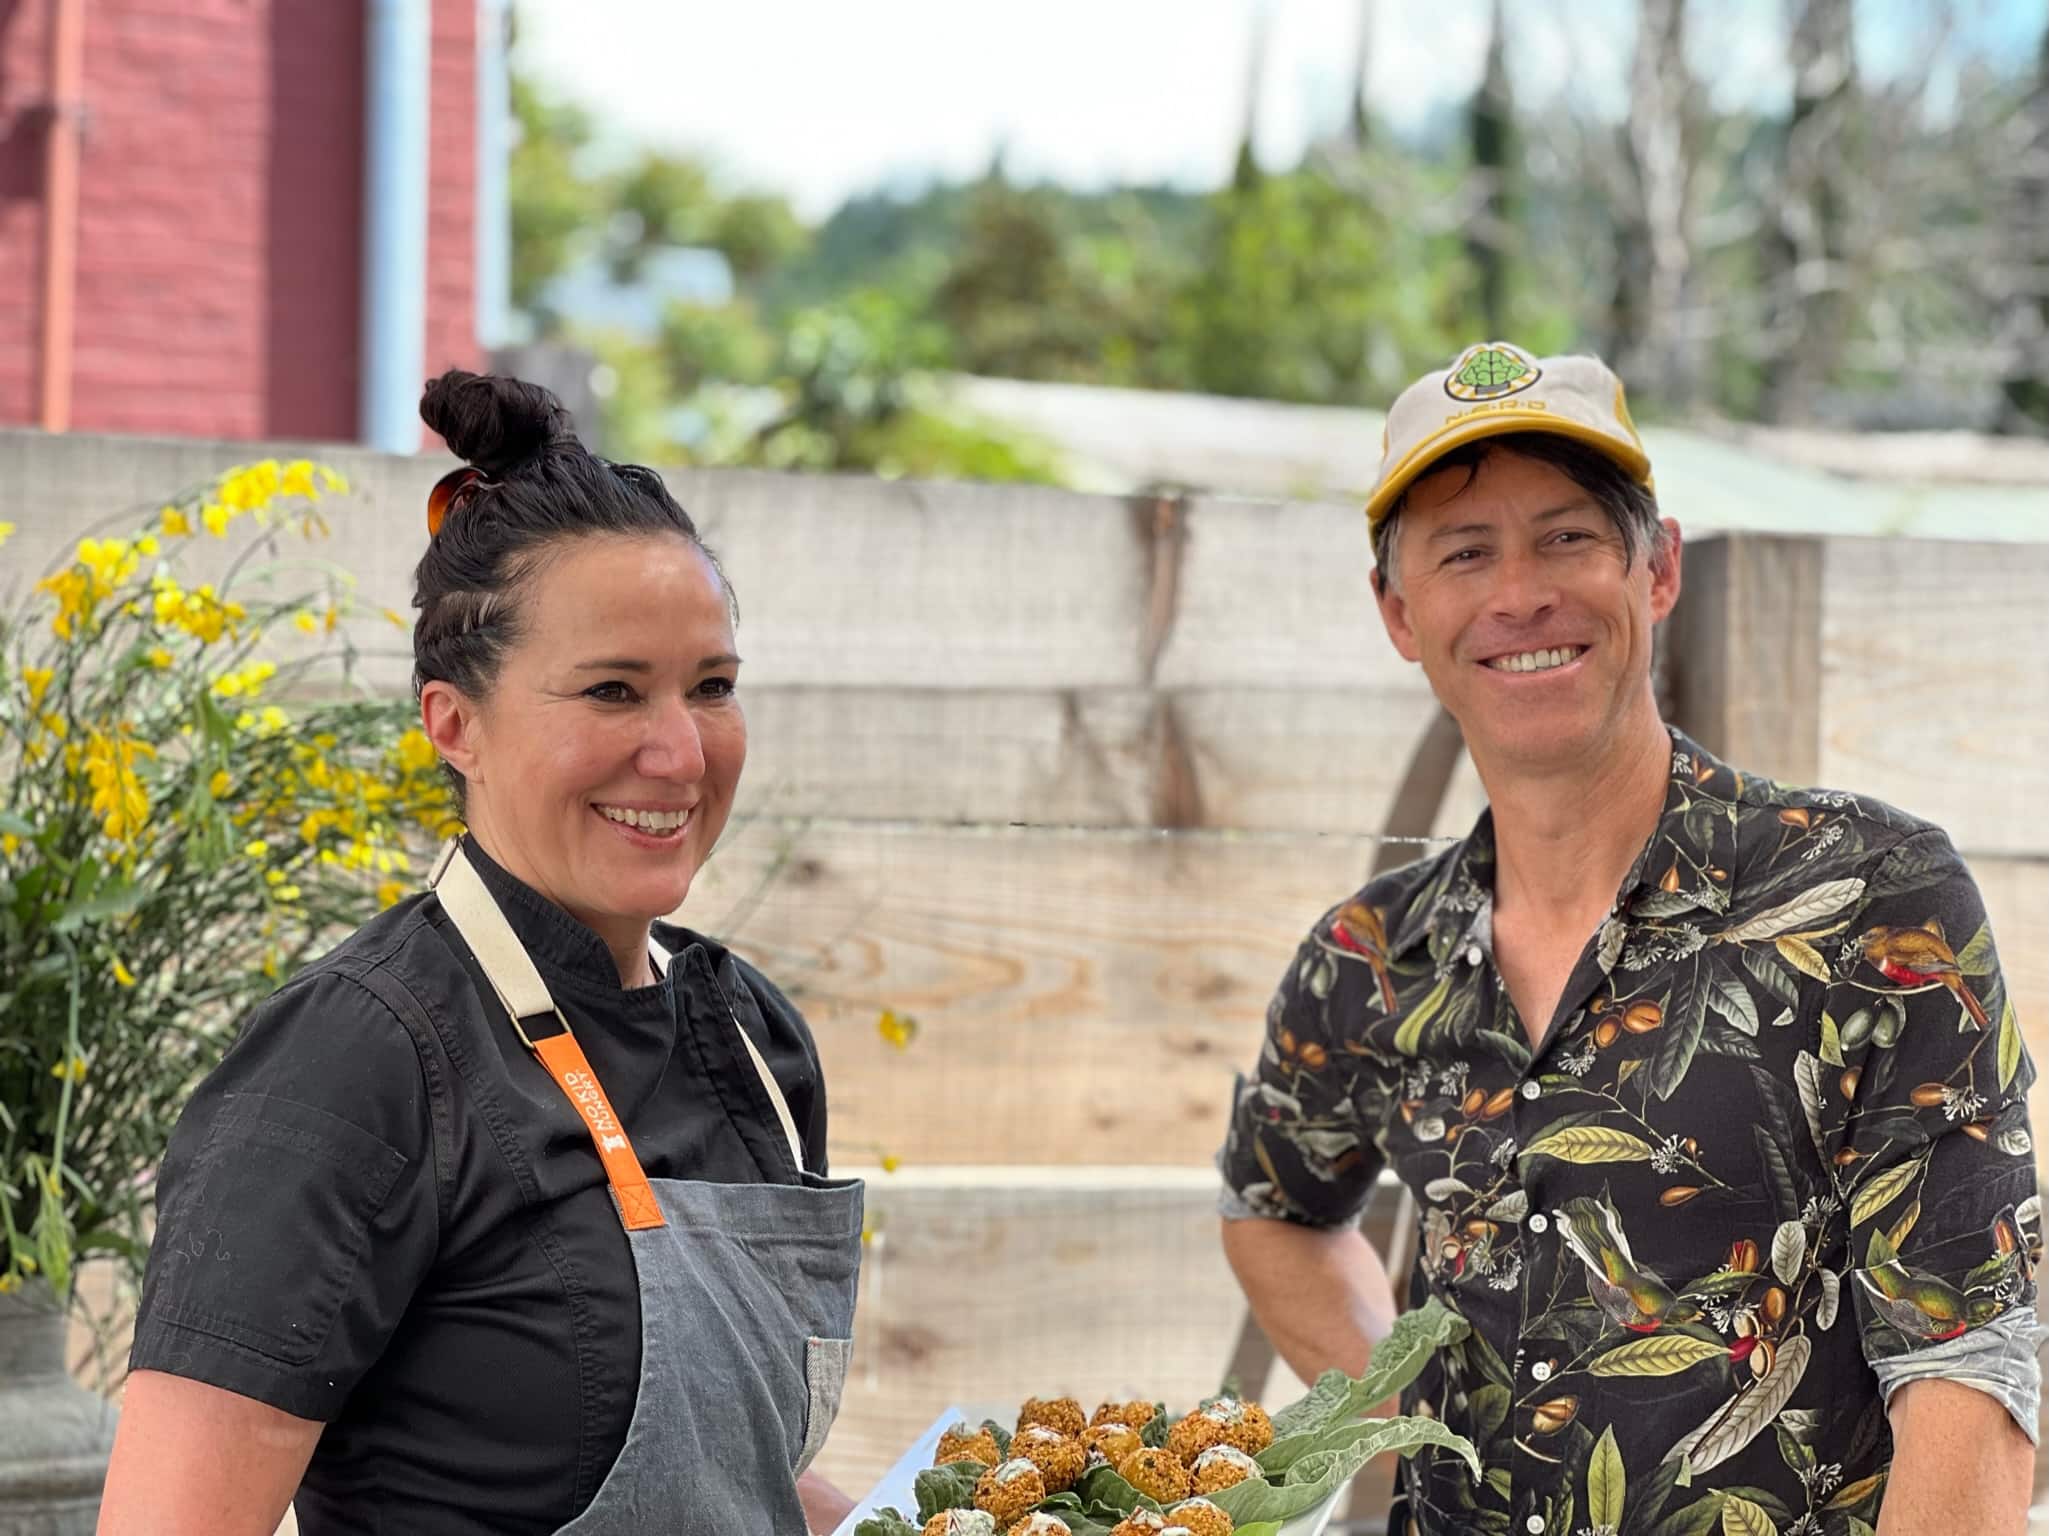 Winemaker Brook Bannister smiling in floral shirt and hat standing next to Domenica Catelli holding her delicious food.